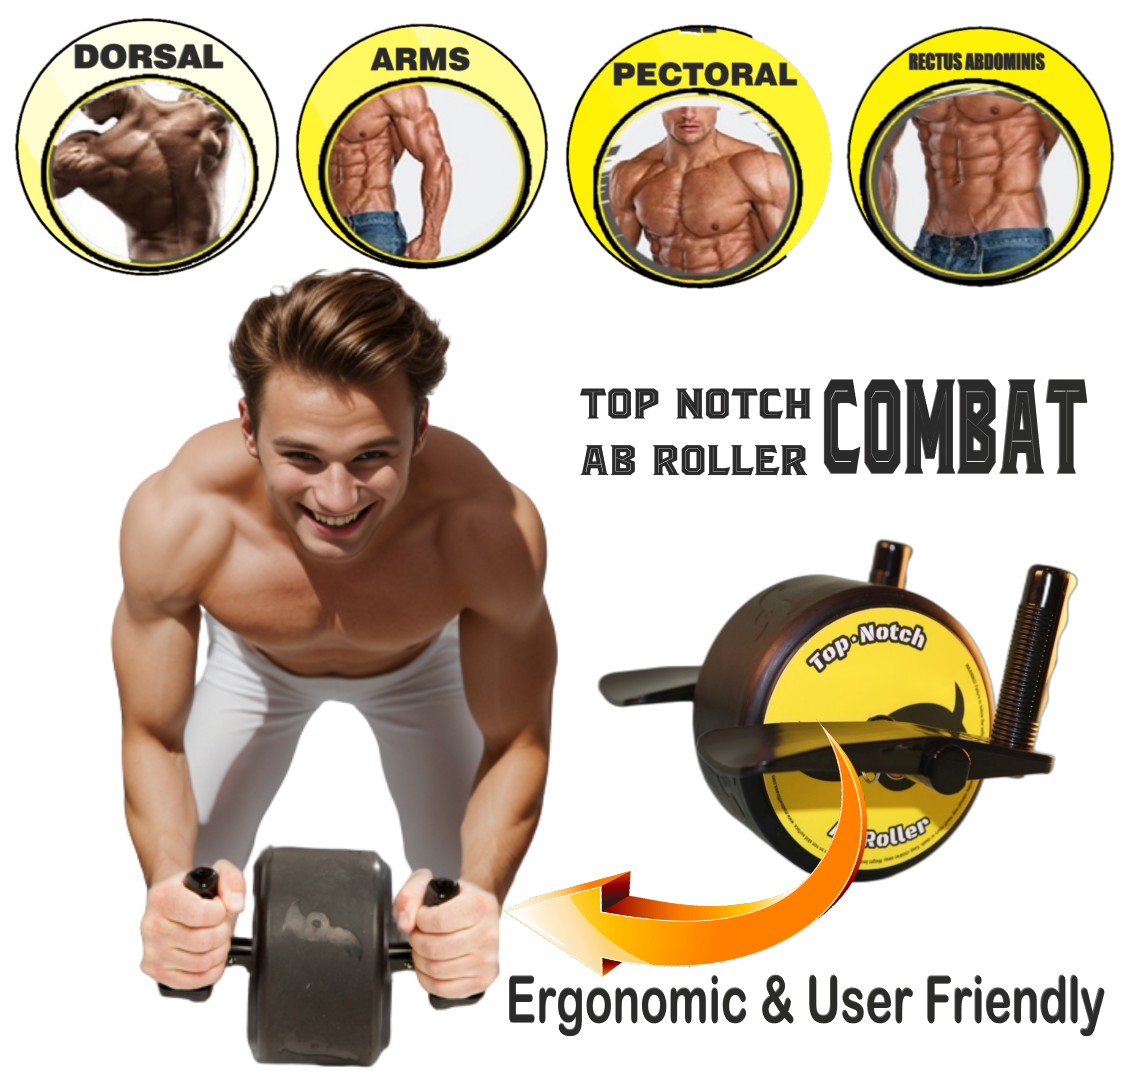 Top Notch Ab Roller Combat - Mad Owl Fitness Gear